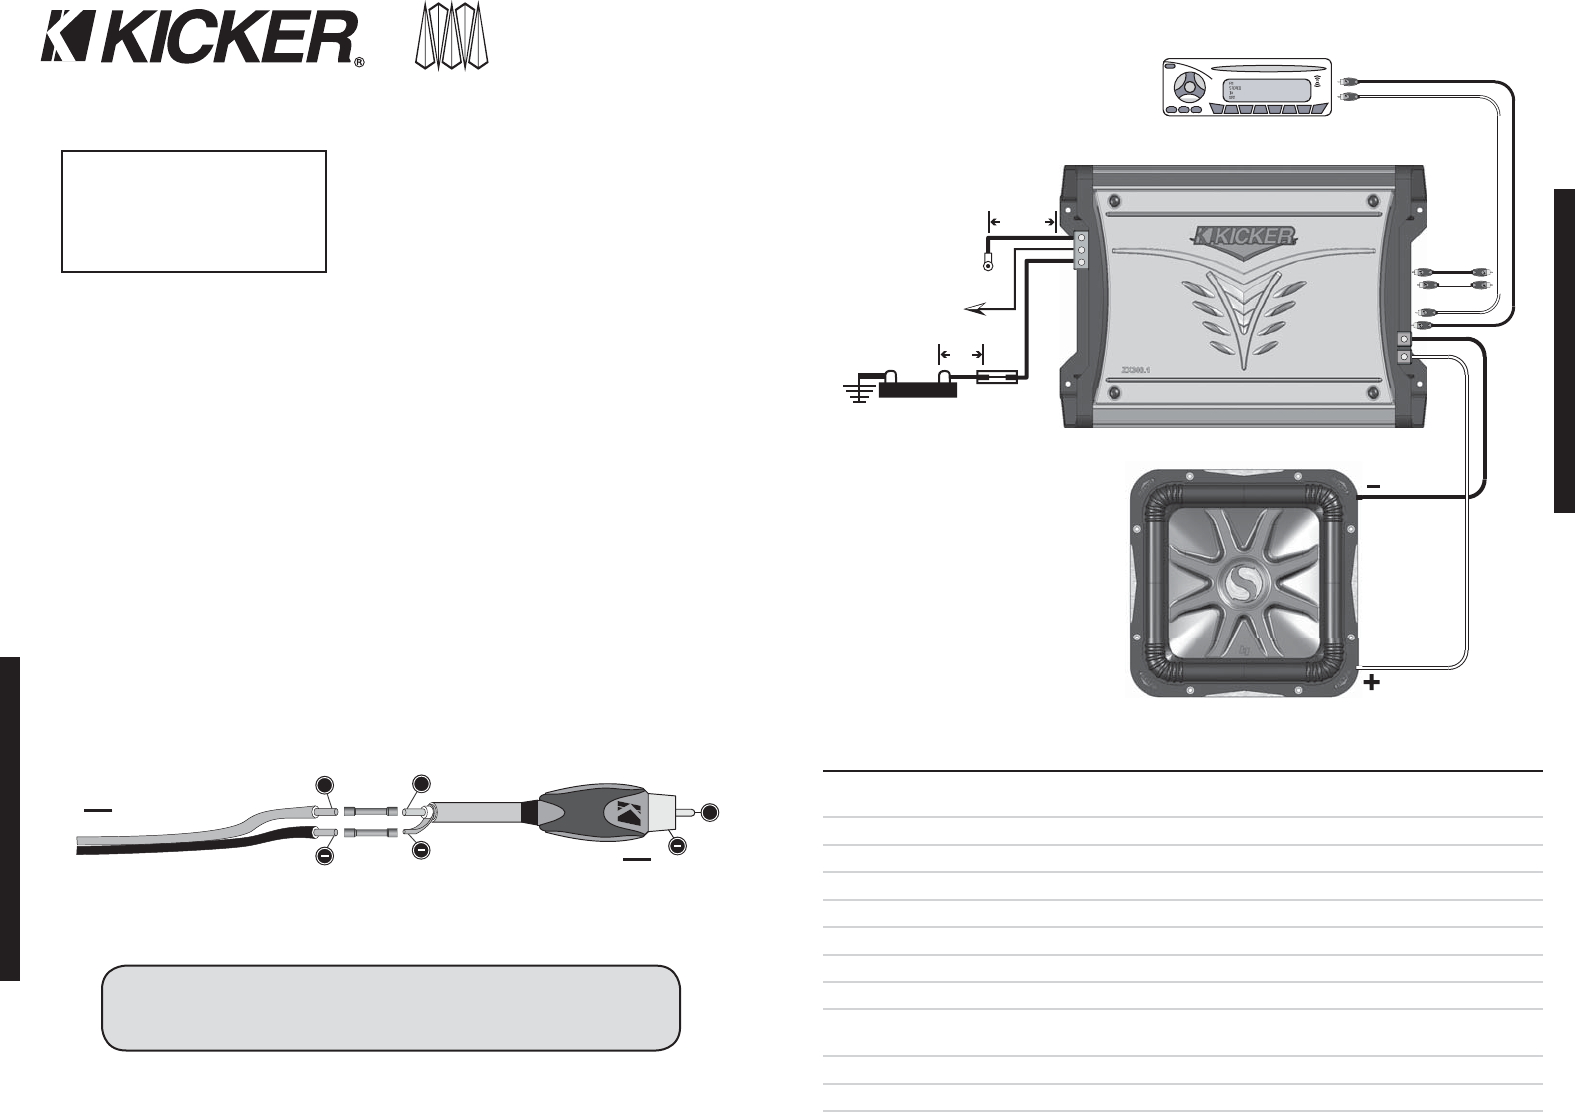 Wiring Diagram For A Kicker Impulse 3 5 4 By 1 4 Channel Amp